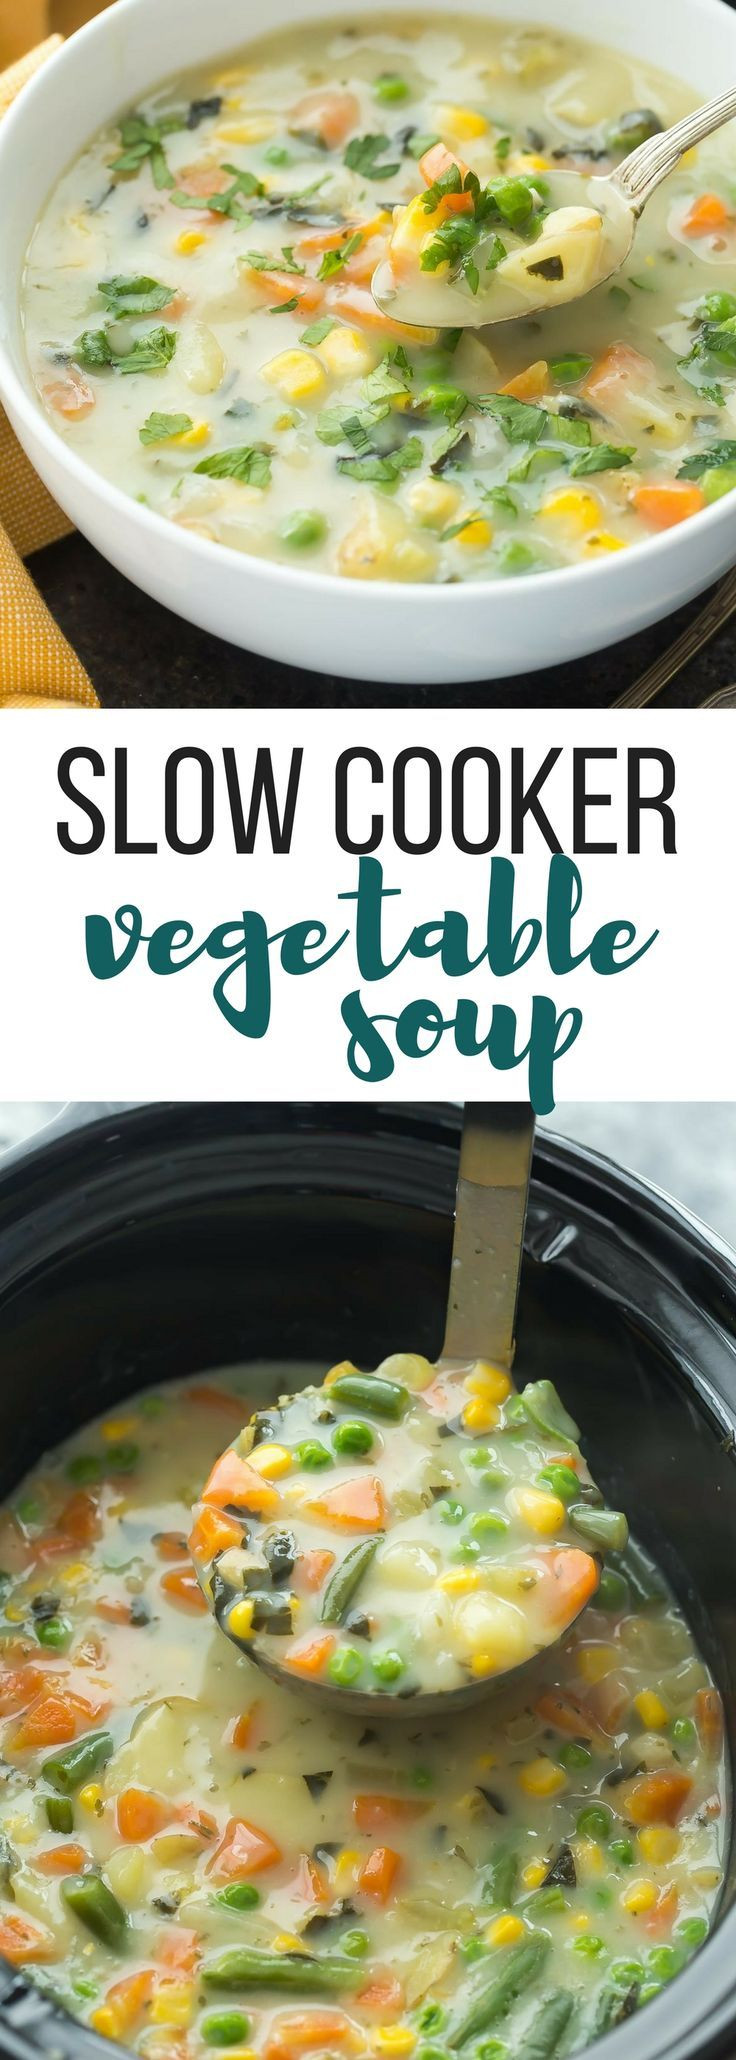 Healthy Vegetarian Crockpot Recipes
 25 best ideas about Creamy ve able soups on Pinterest